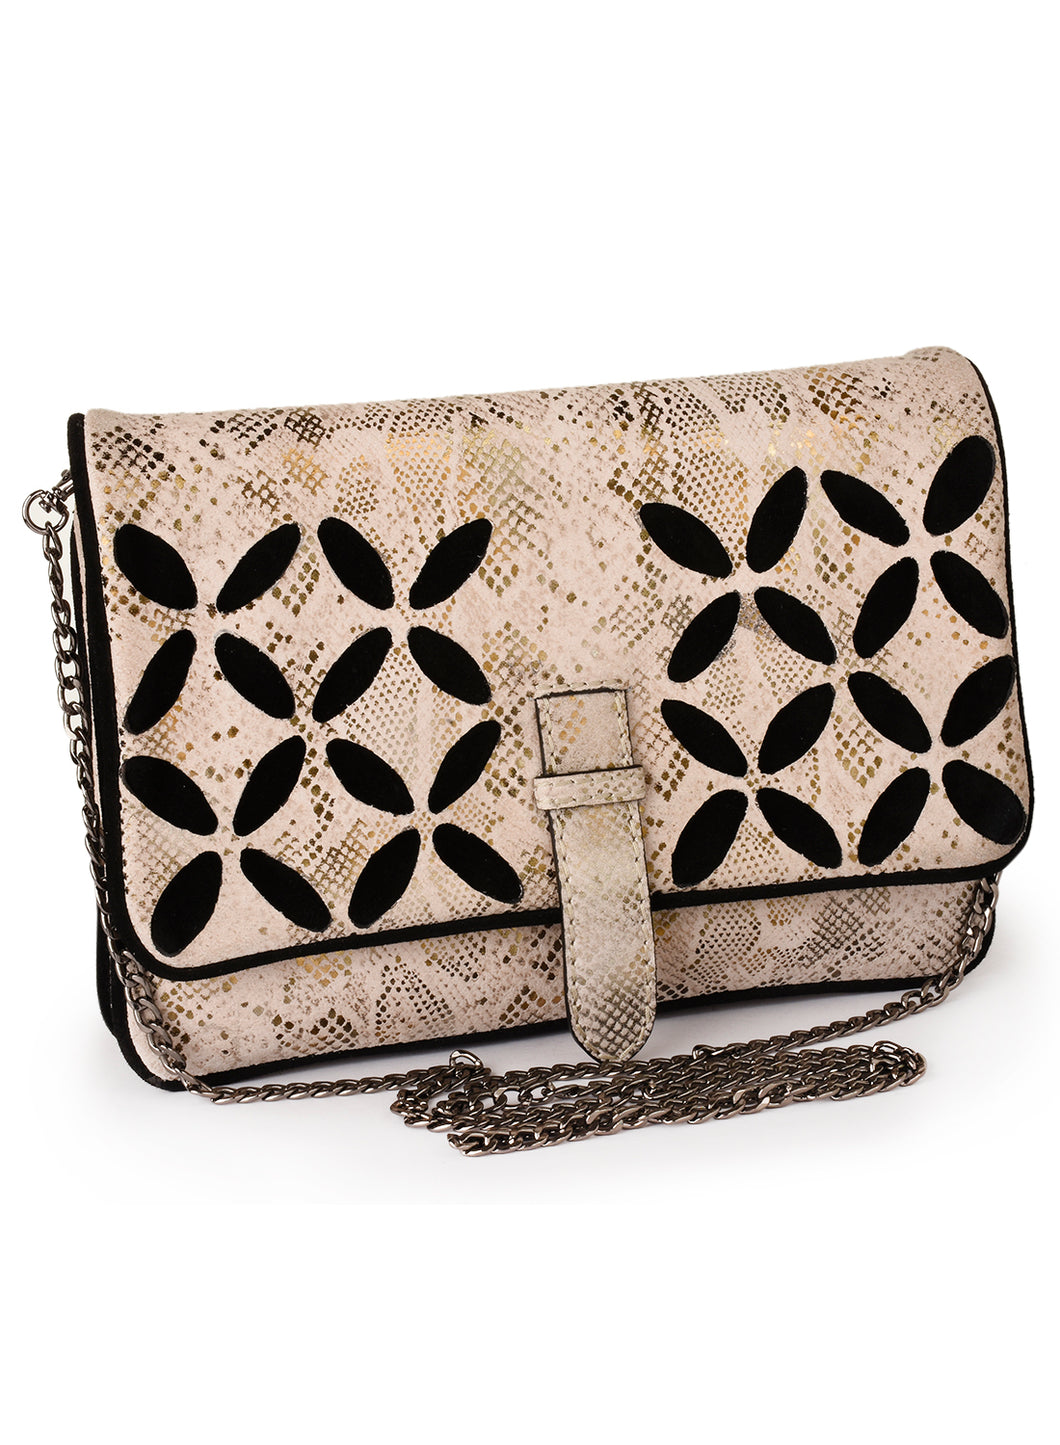 Foiled Snake Printed Double Clutch